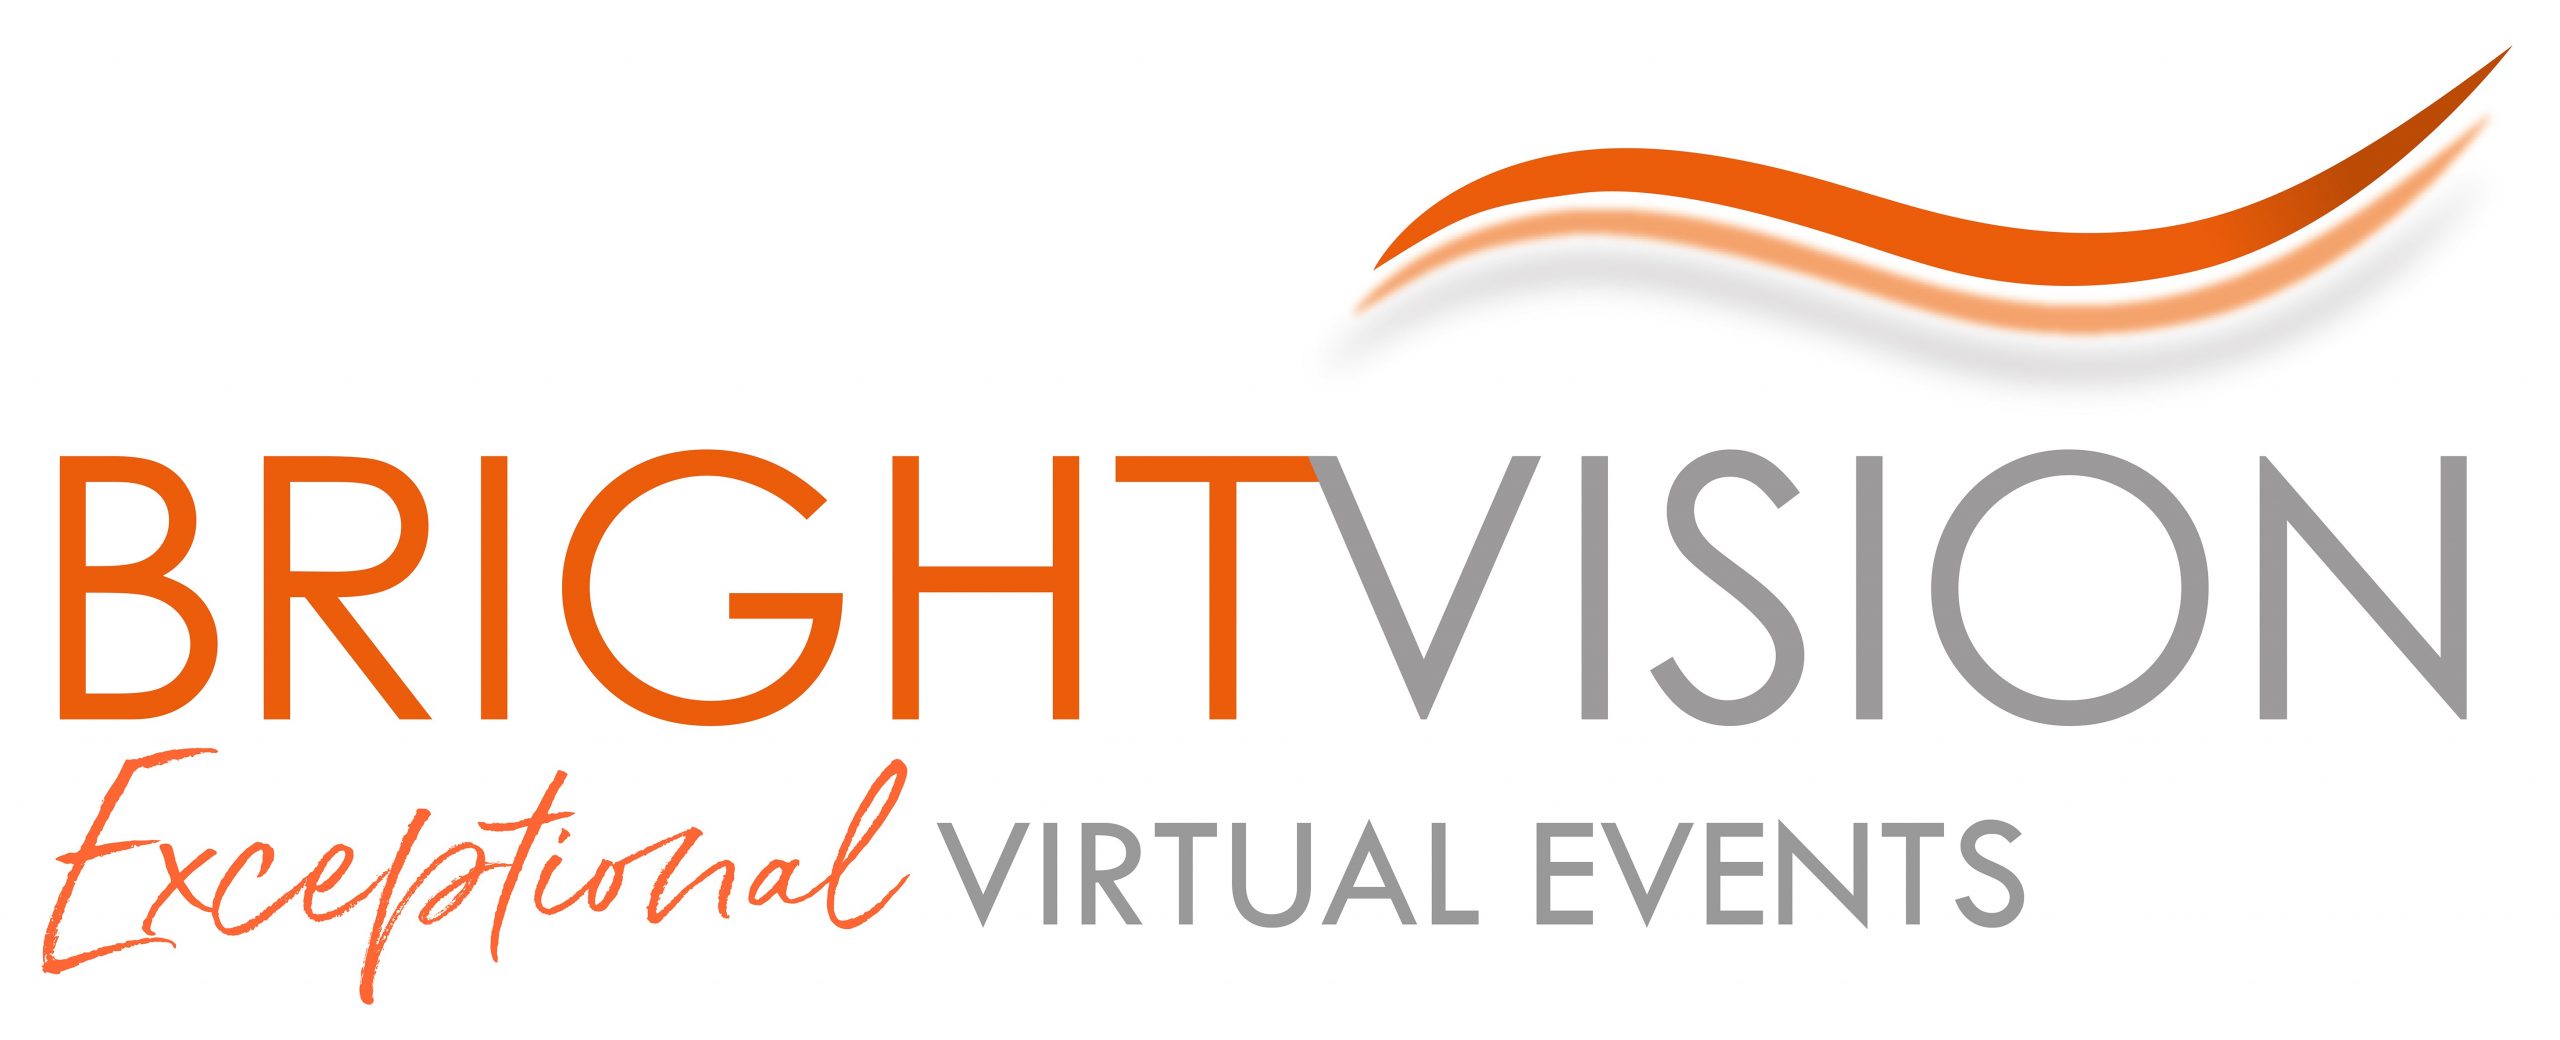 Bright Vision – Exceptional Virtual Events · PA Life